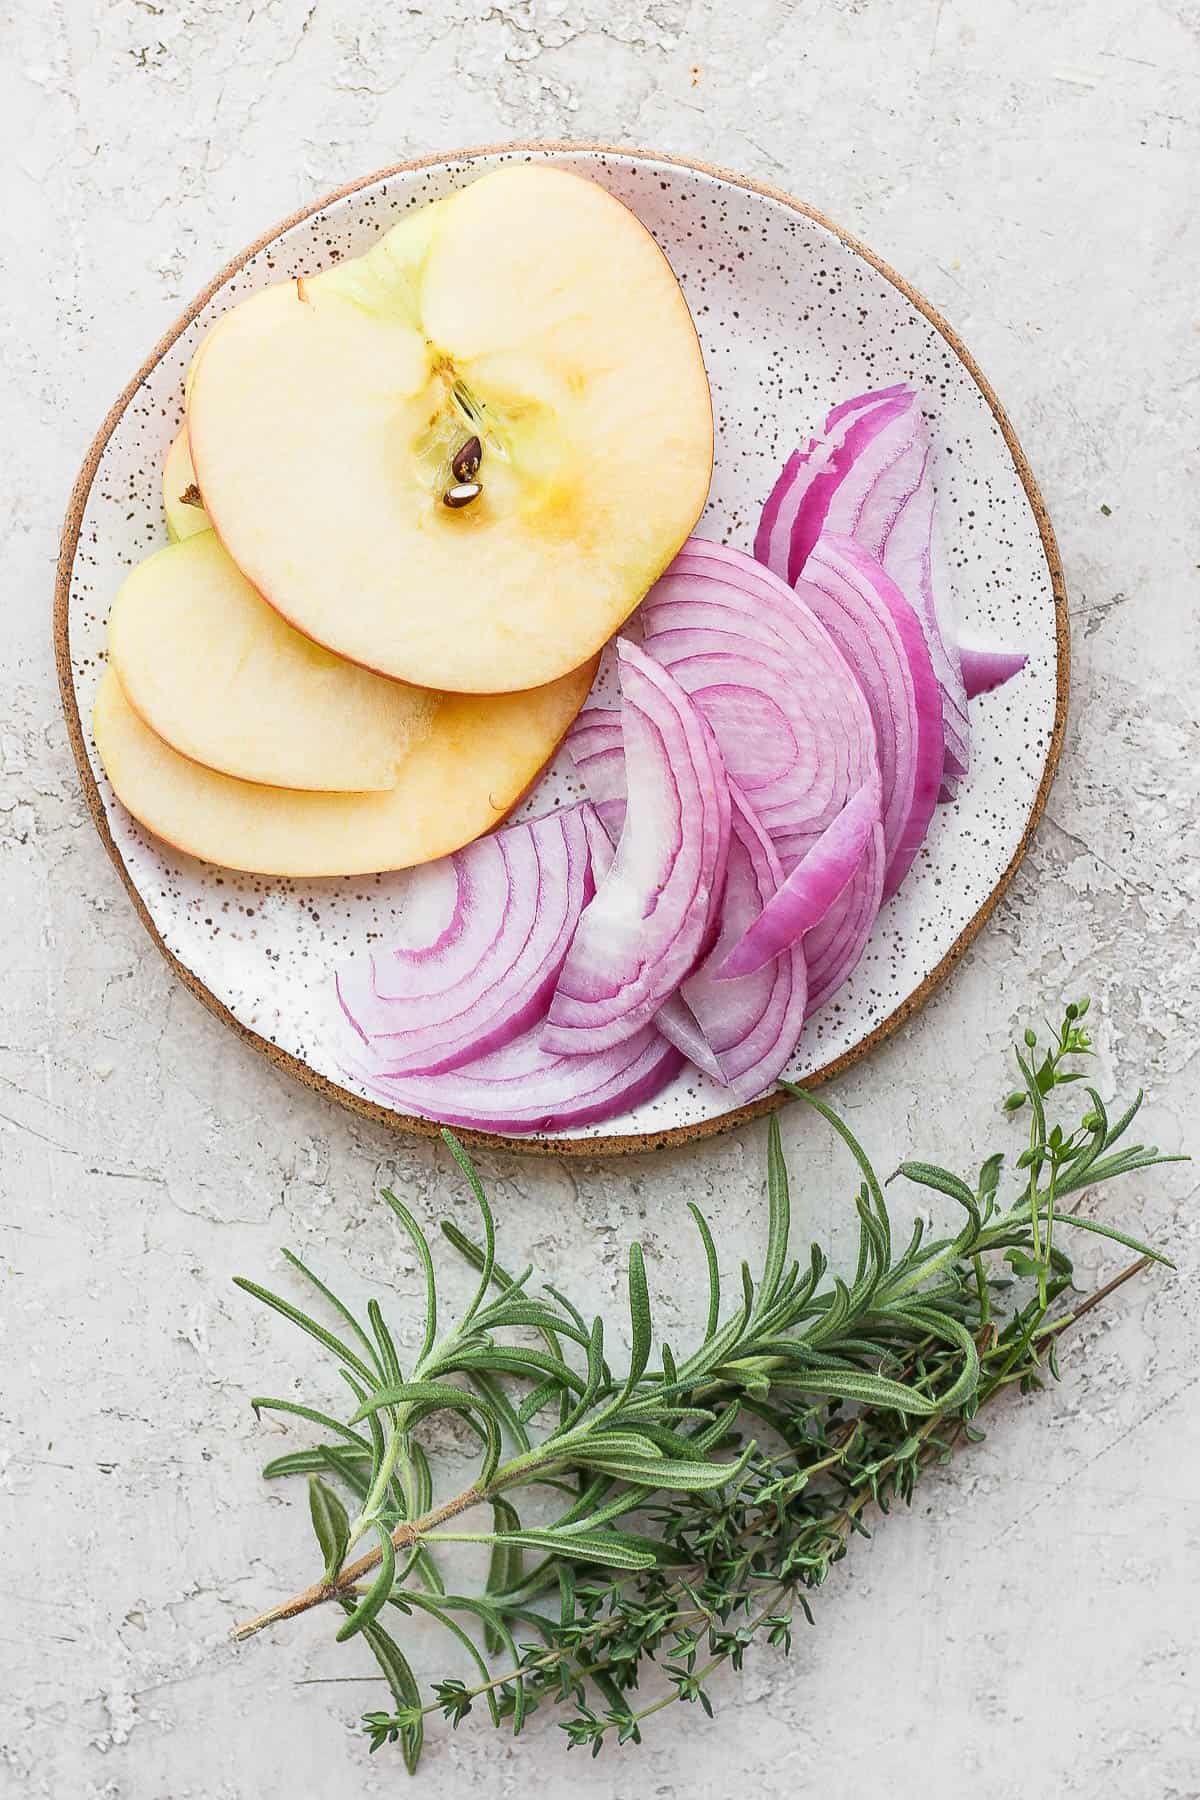 Sliced apple and red onion on a plate with sprigs of rosemary and thyme on the side.